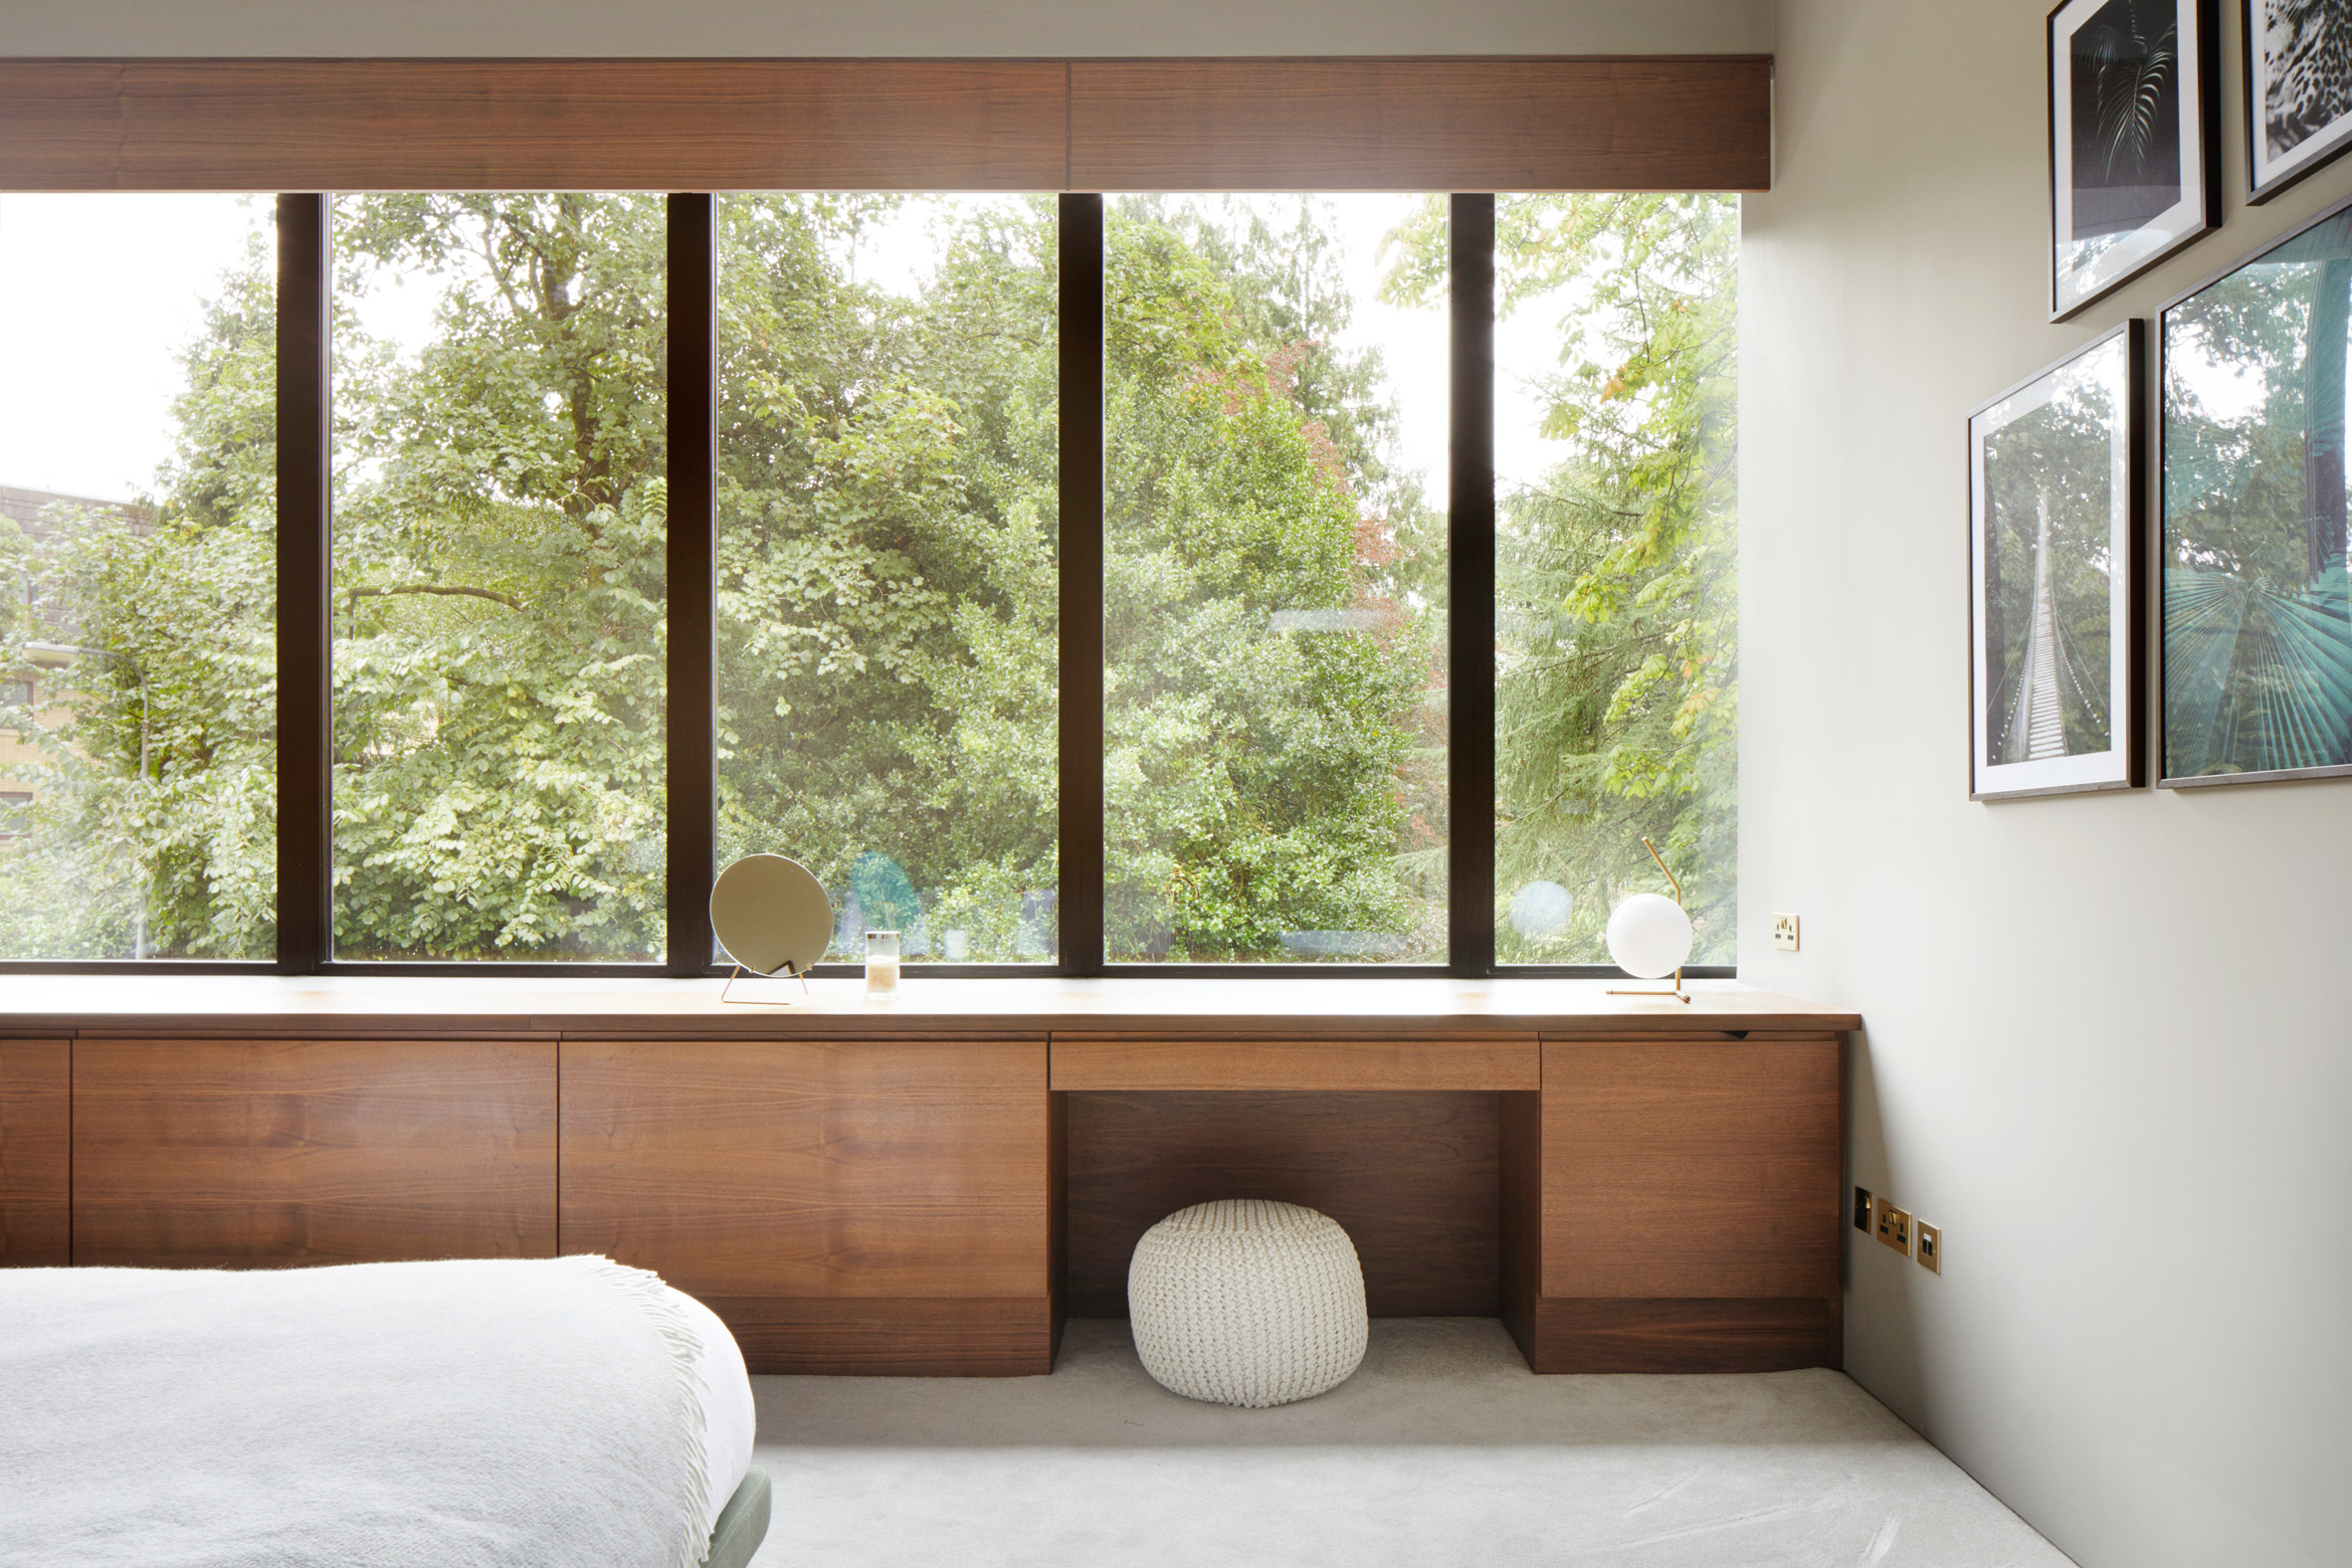 Walnut joinery within a white-walled bedroom in a Scottish house